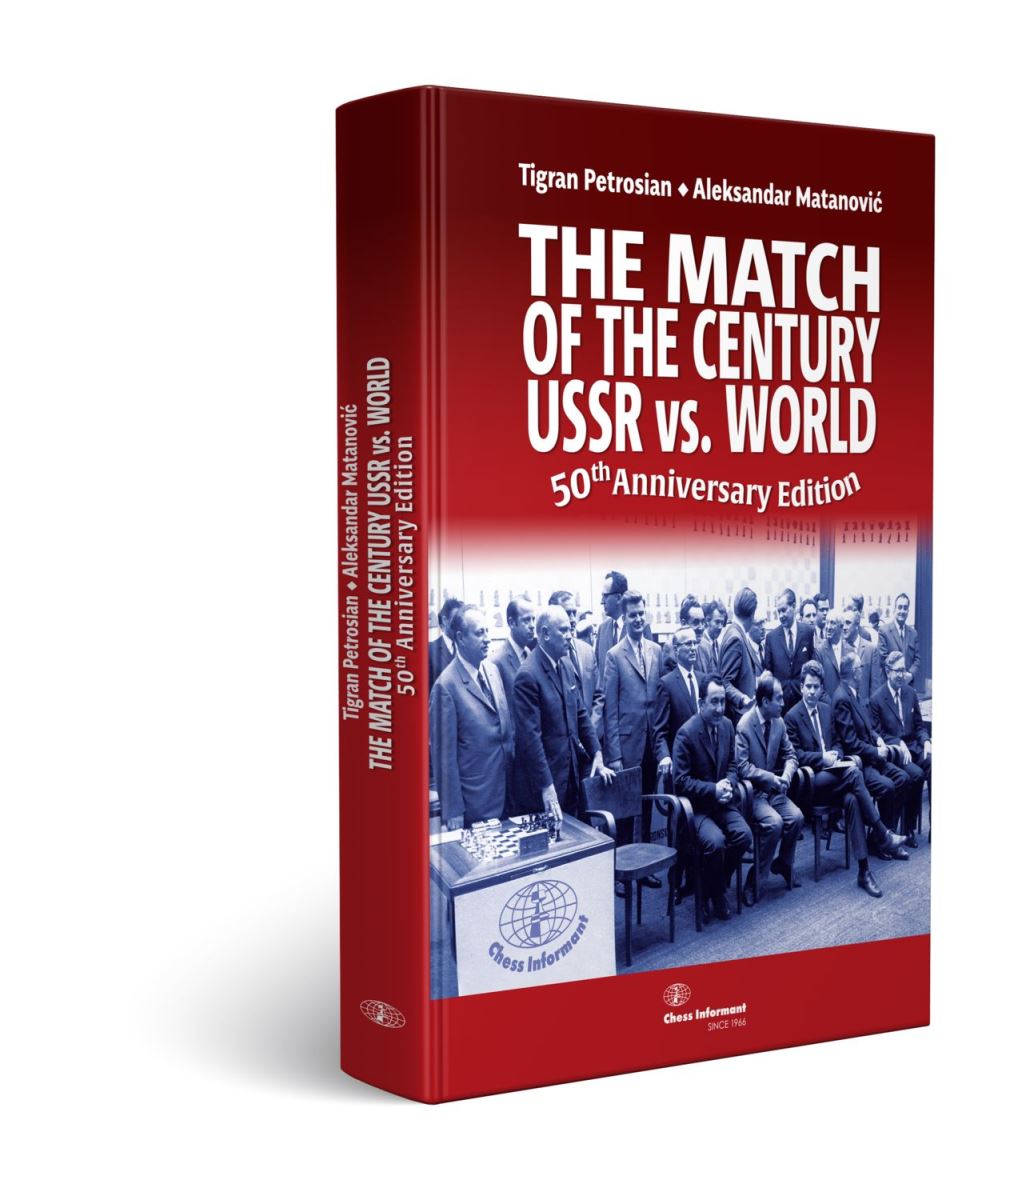 Chessbomb is broadcasting the USSR vs. Rest of the World match